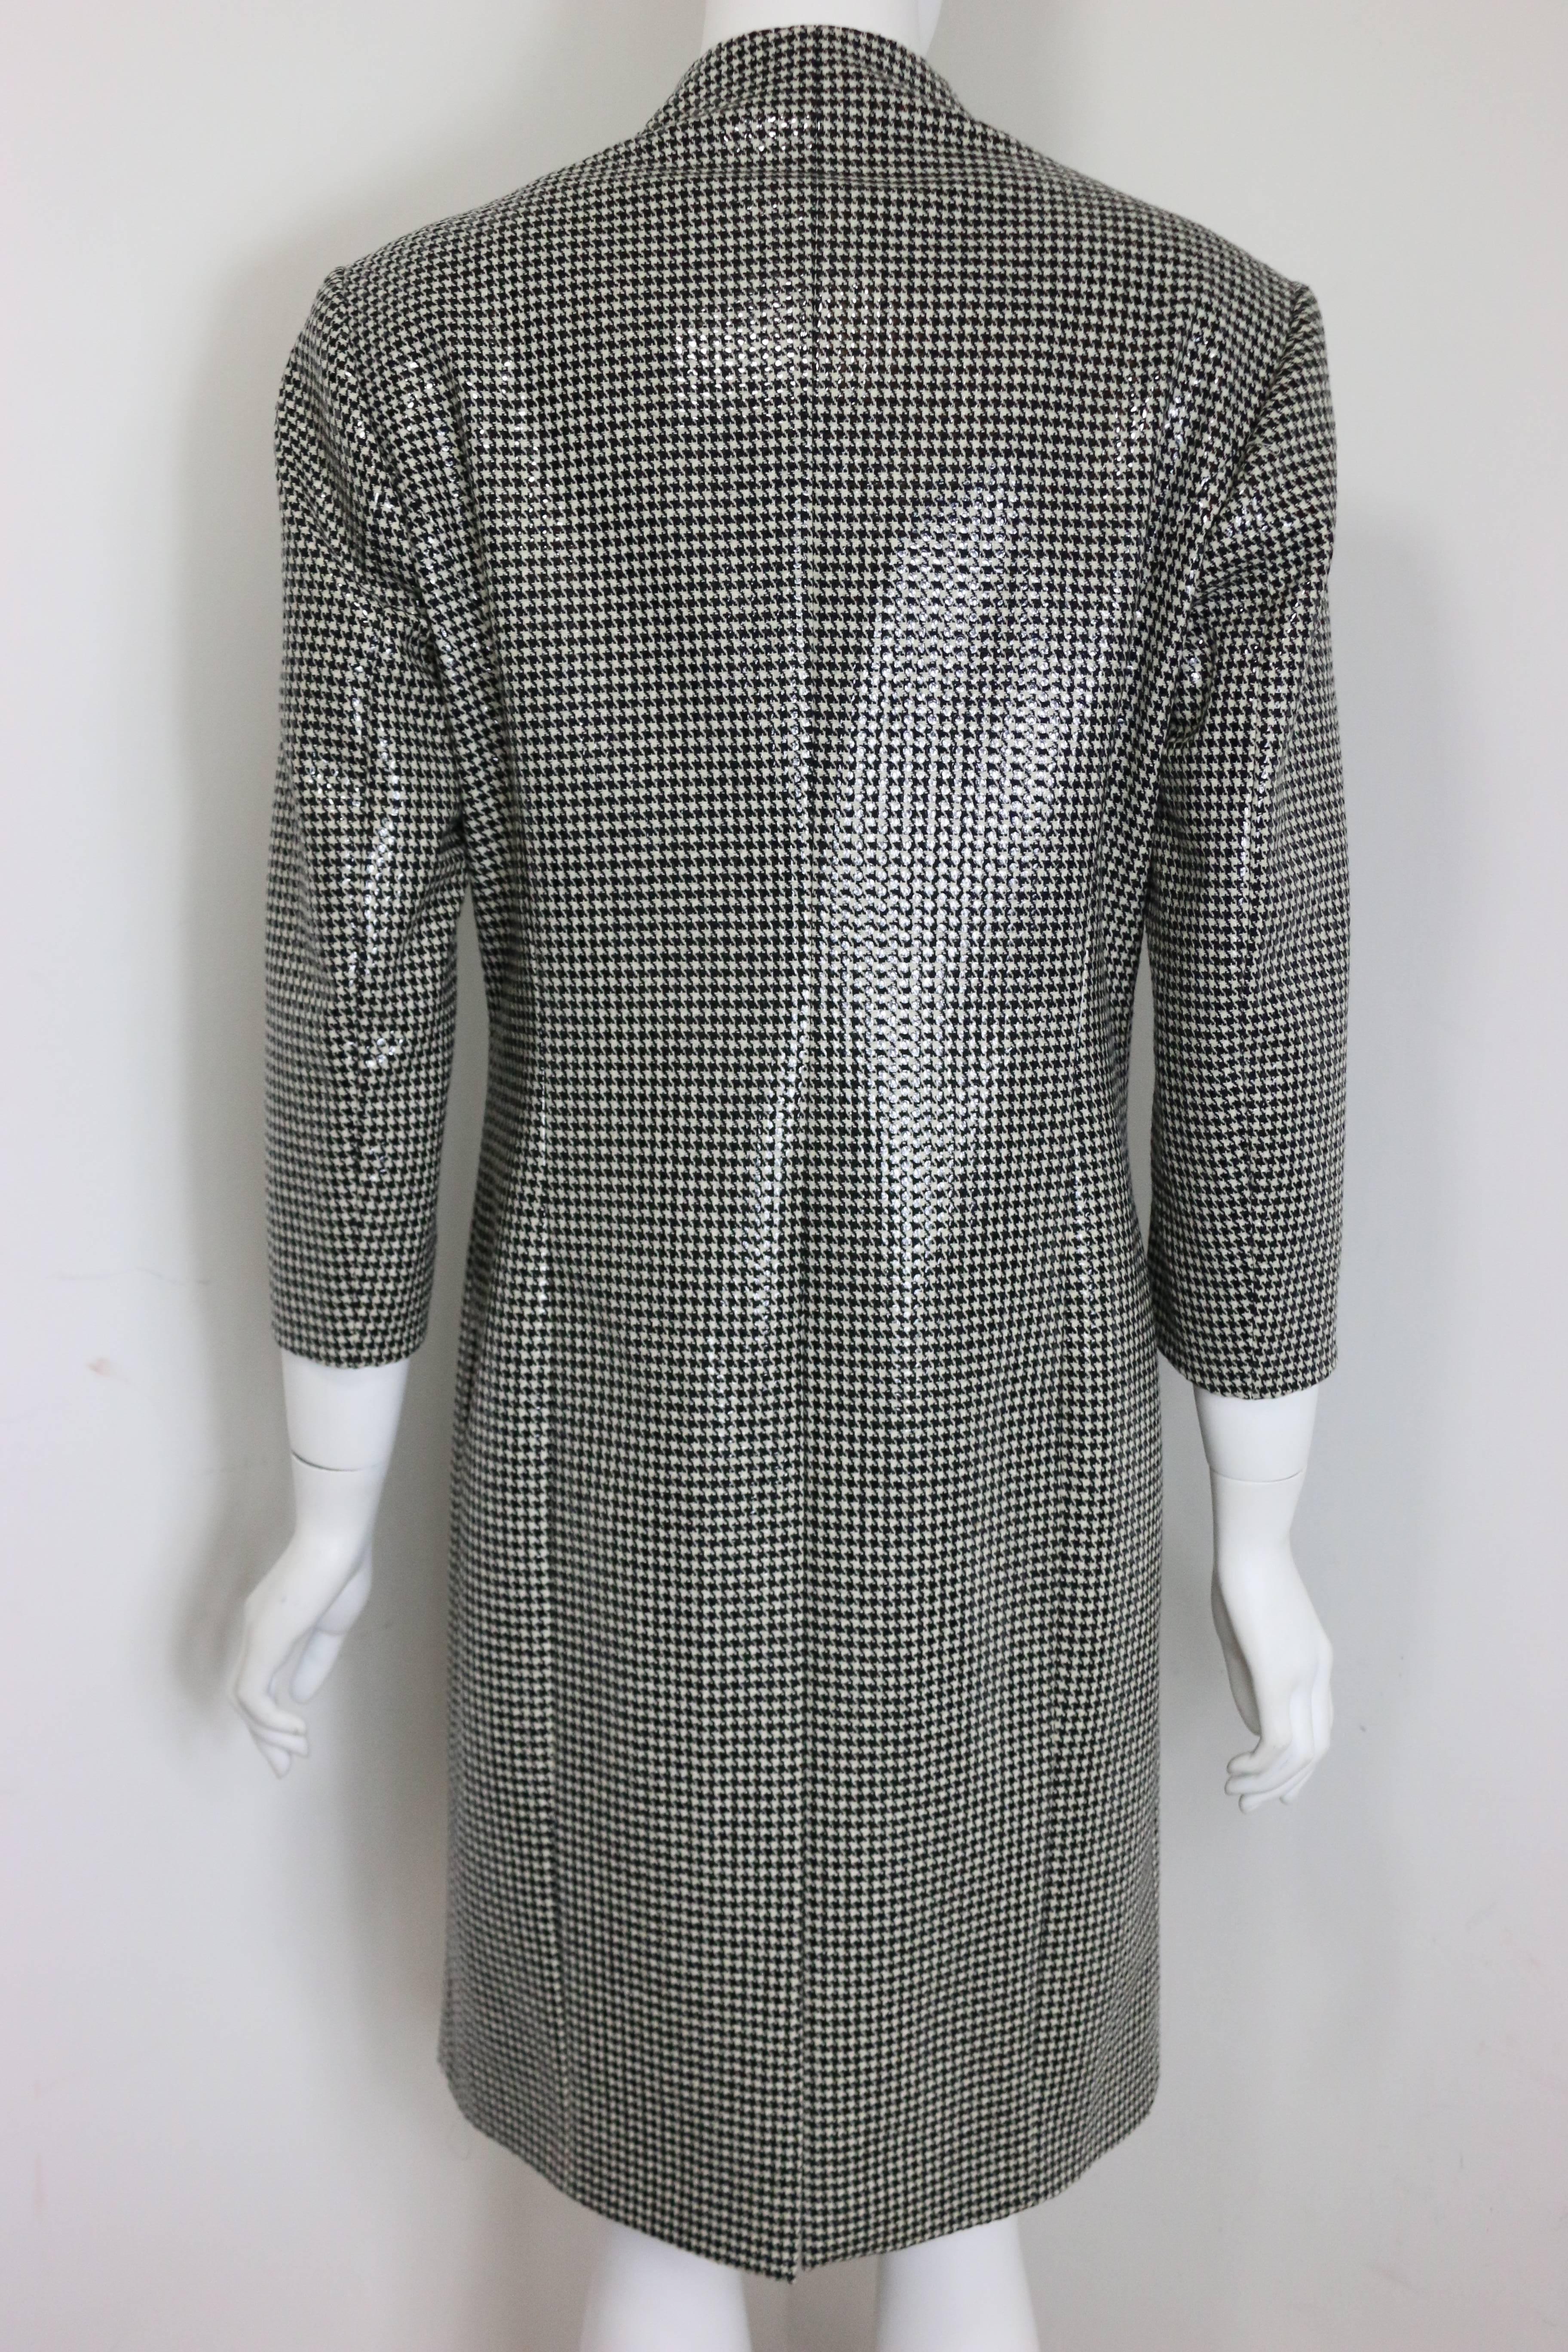 - Anteprima black and white houndstooth wool long coat with transparent sequin on top. It makes the coat look shinny. 

- Featuring stand collar, two side pockets, 3/4 quarters sleeves and one button closure. 

- Size 42. 

- Made in Italy. 

- 80%